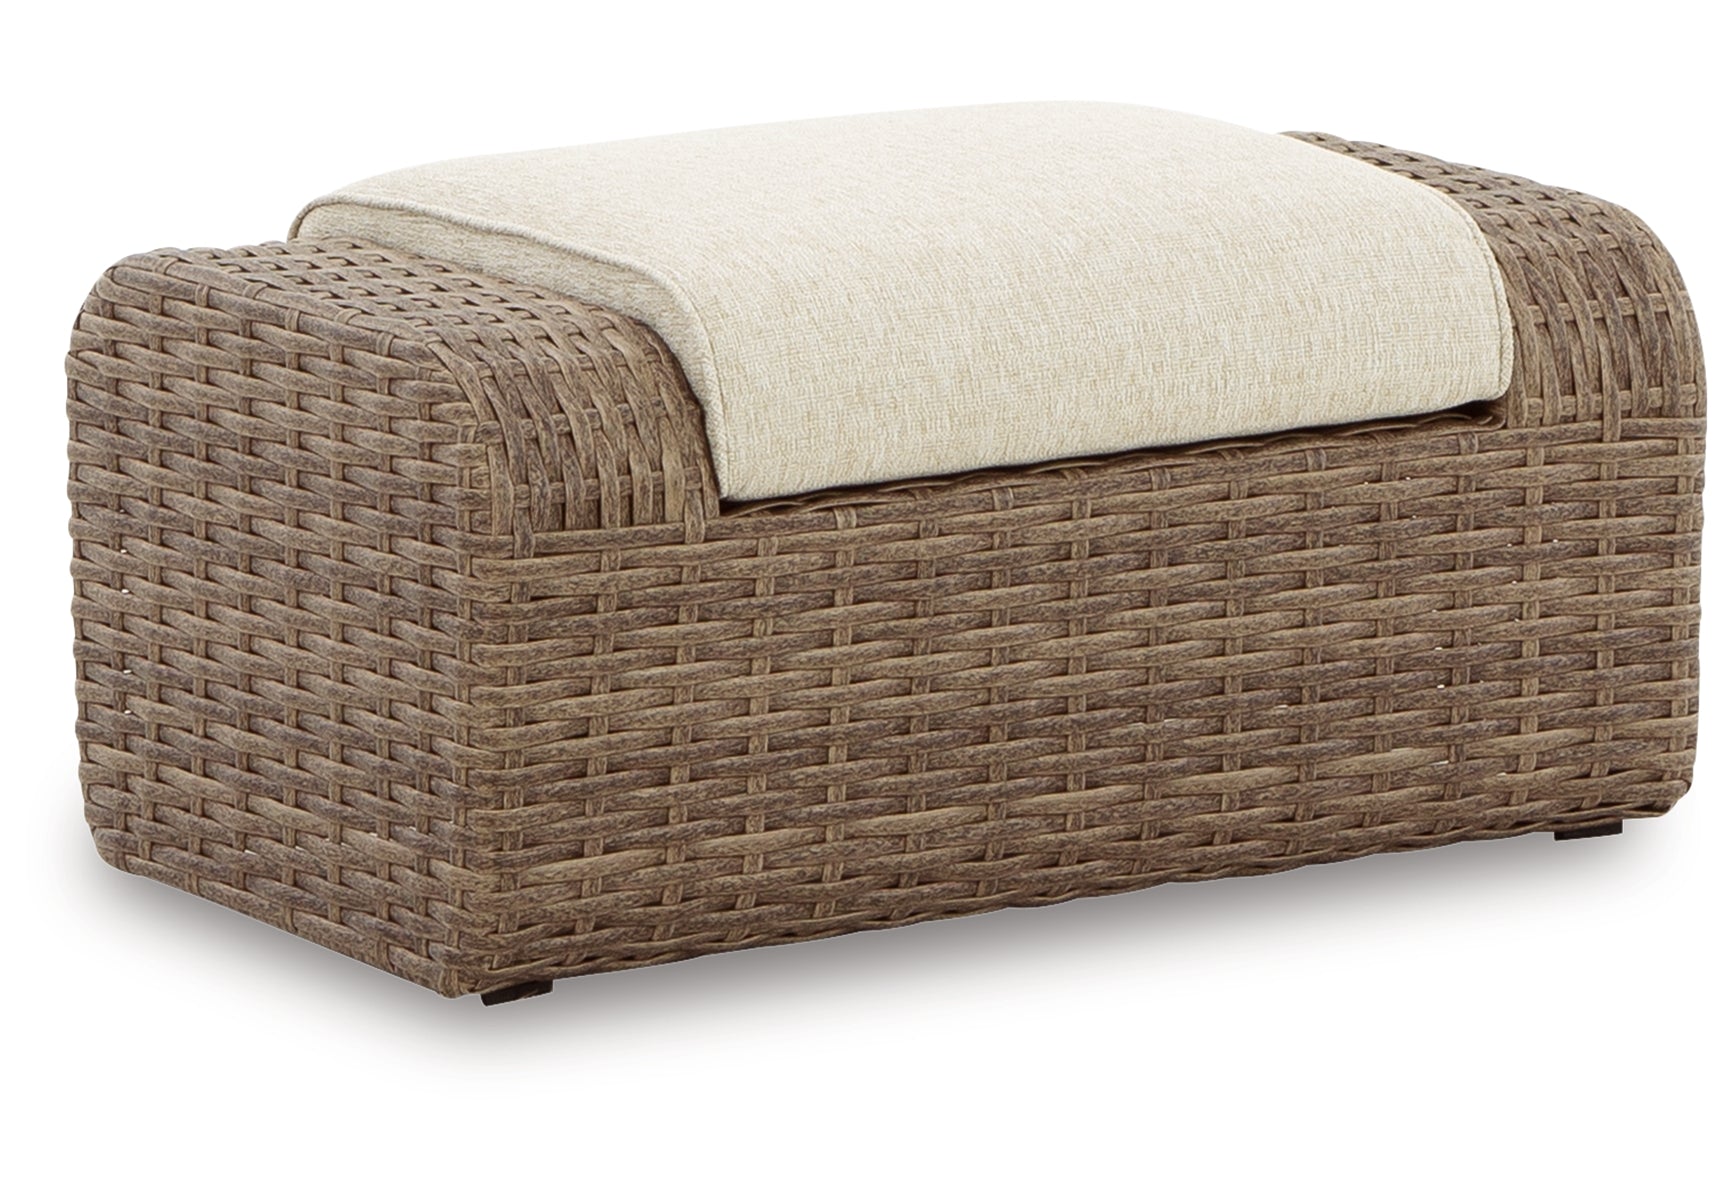 SANDY BLOOM Outdoor Ottoman with Cushion